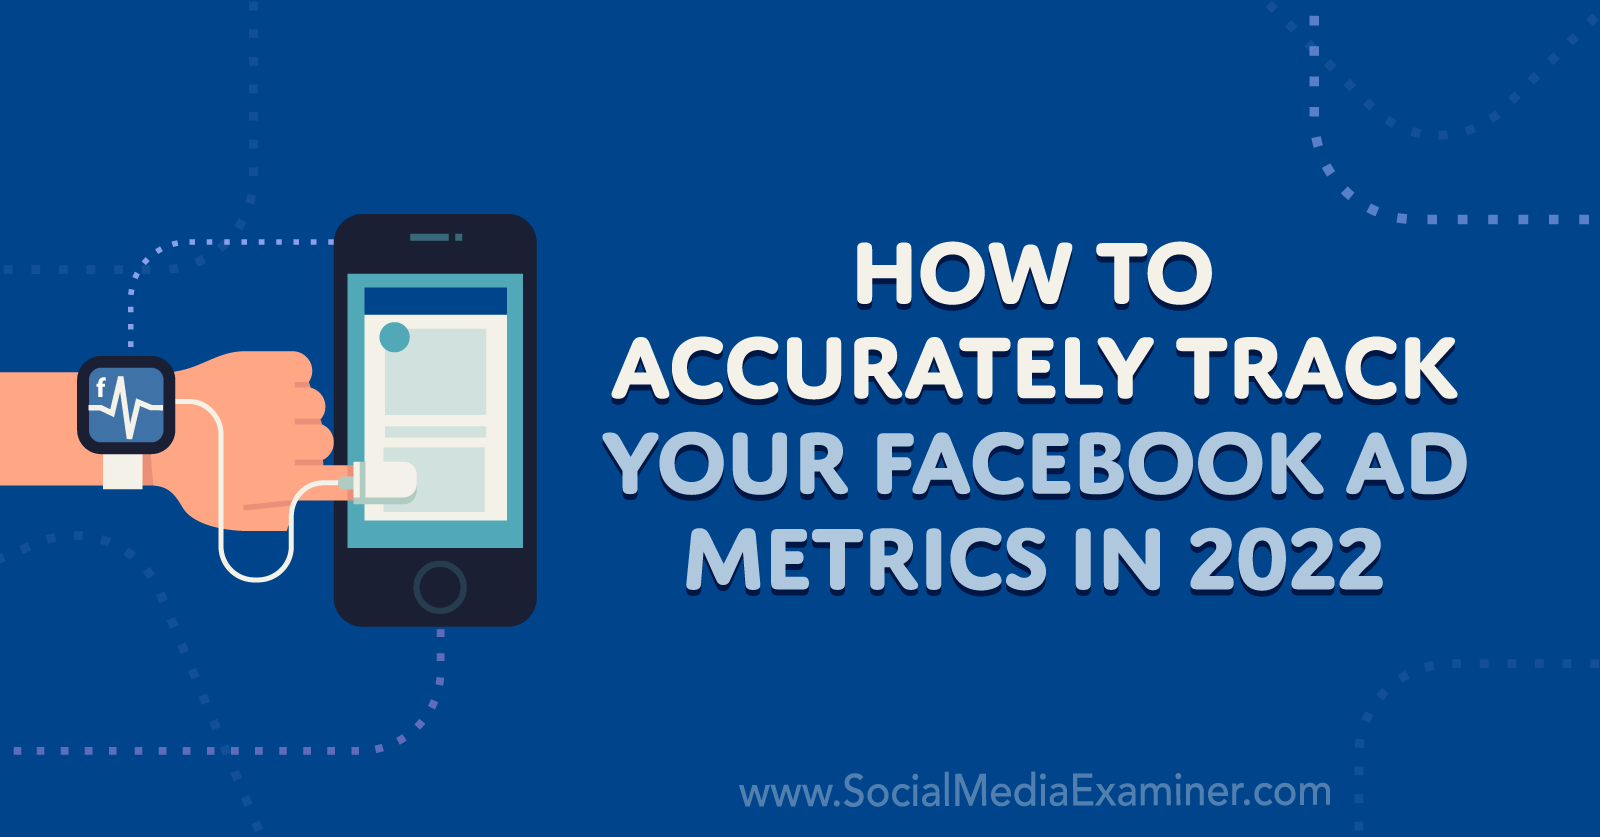 How to Accurately Track Your Facebook Ad Metrics in 2022 by Anna Sonnenberg on Social Media Examiner.